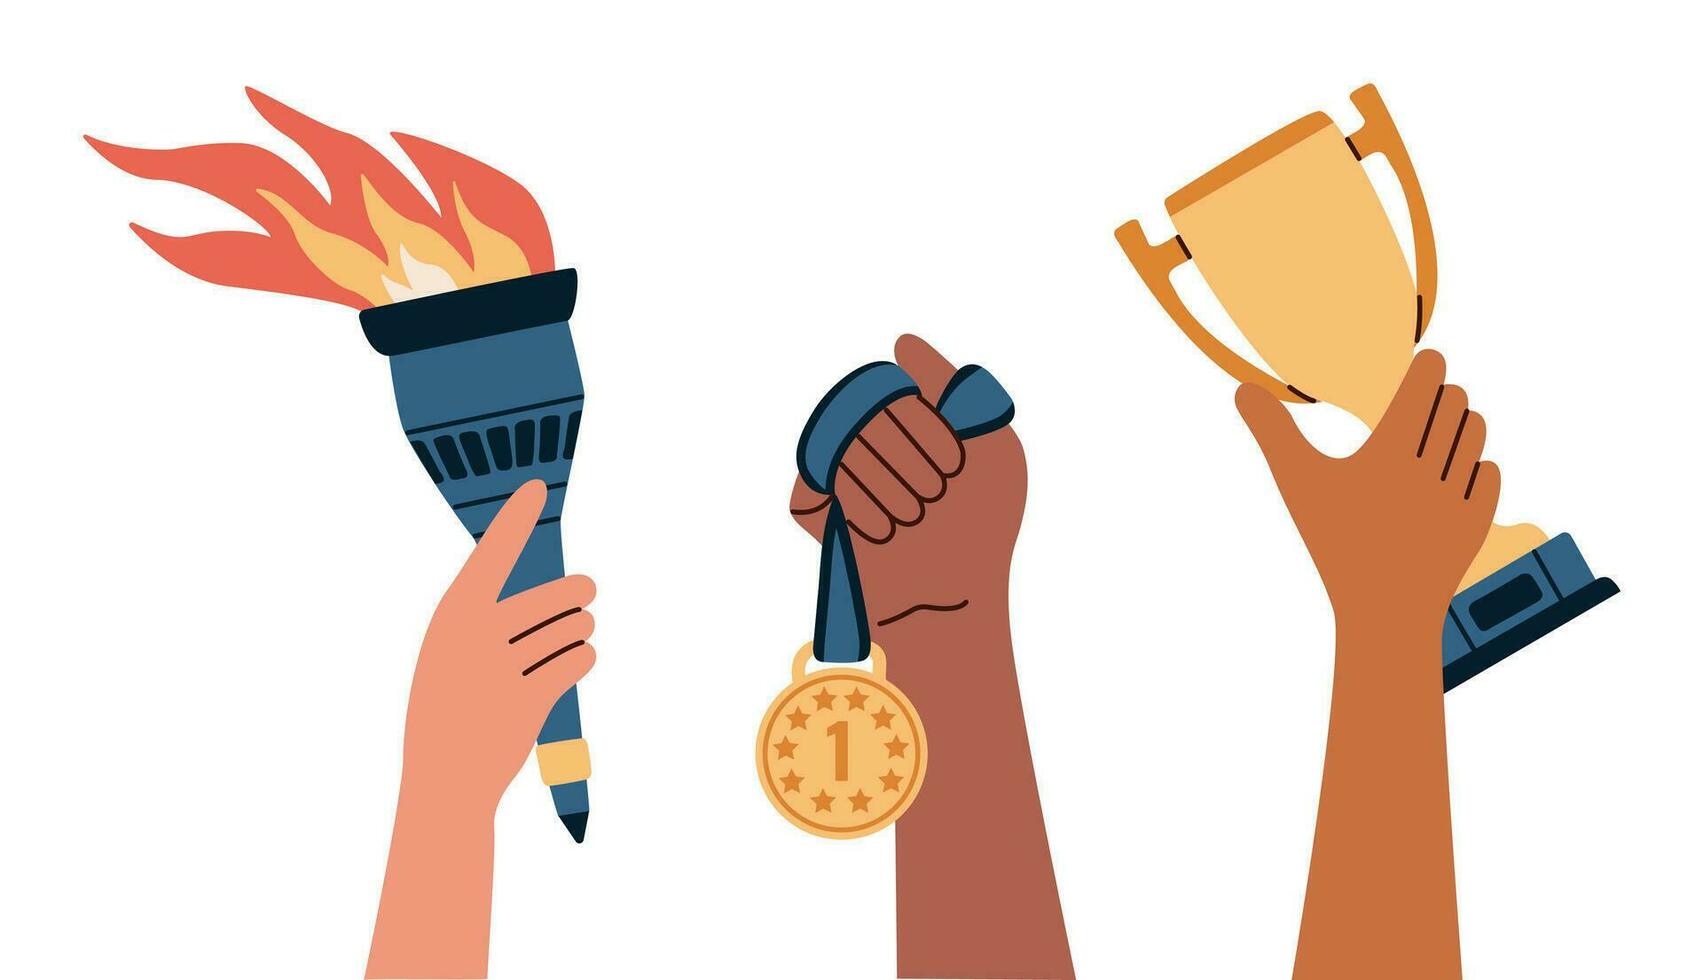 Hands holding gold medal, torch and cup. Symbols of relay race, competition victory, champion or winner. Flat vector illustration.